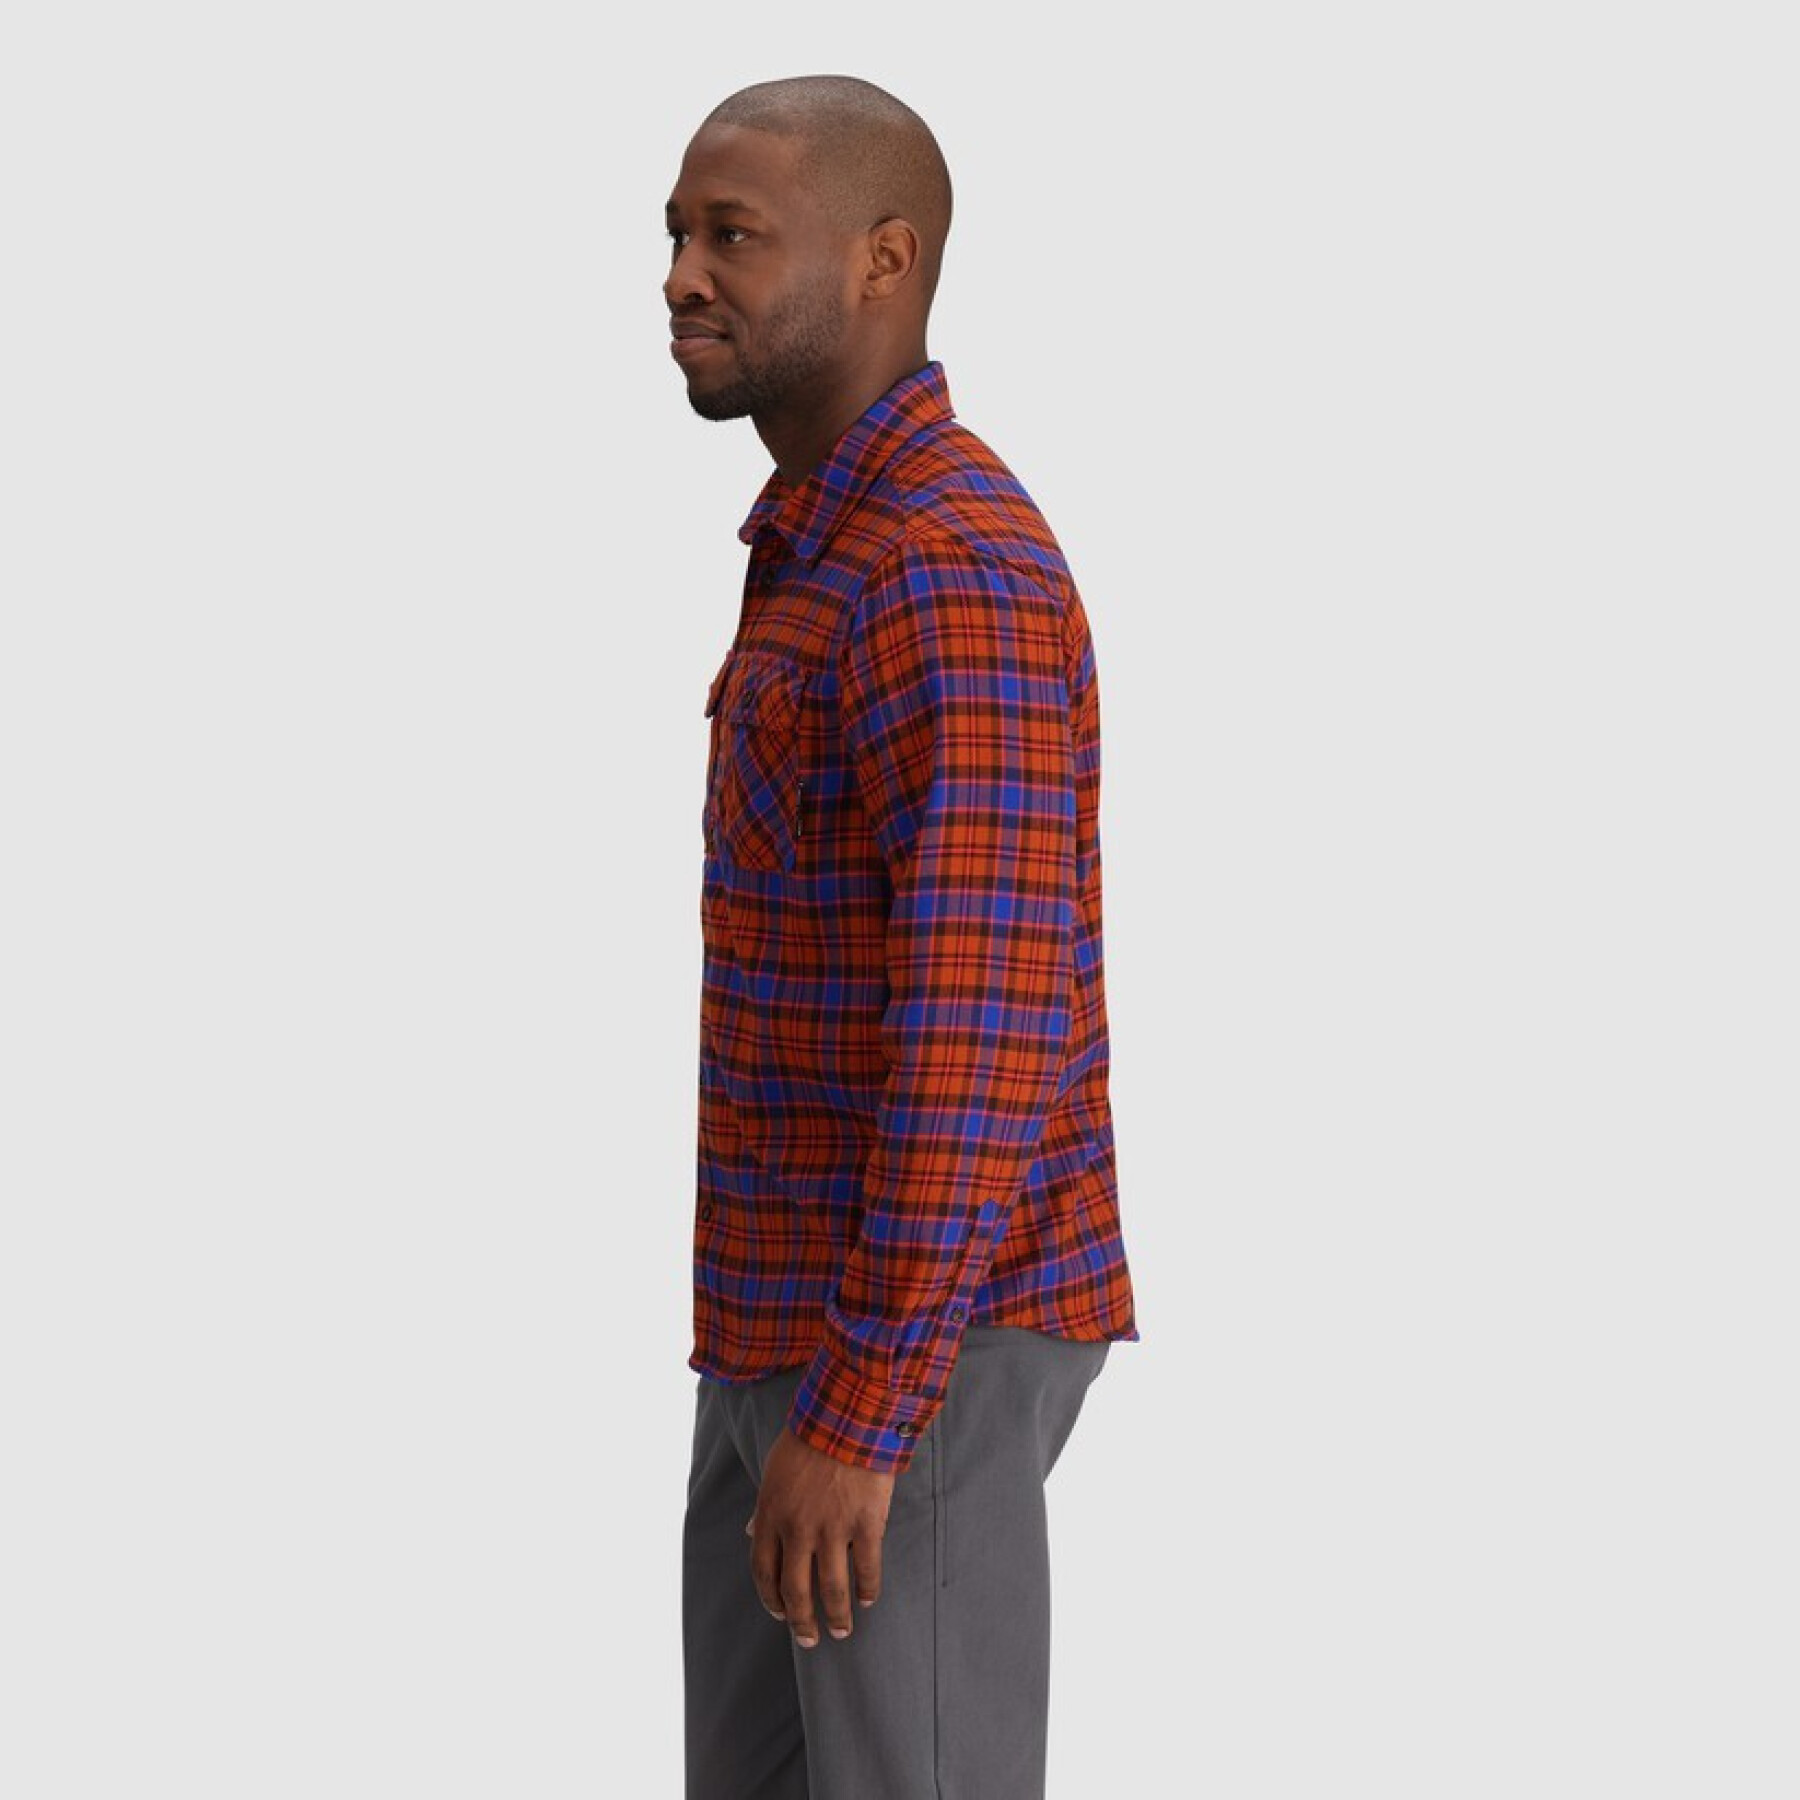 Twill shirt Outdoor Research Feedback Flannel